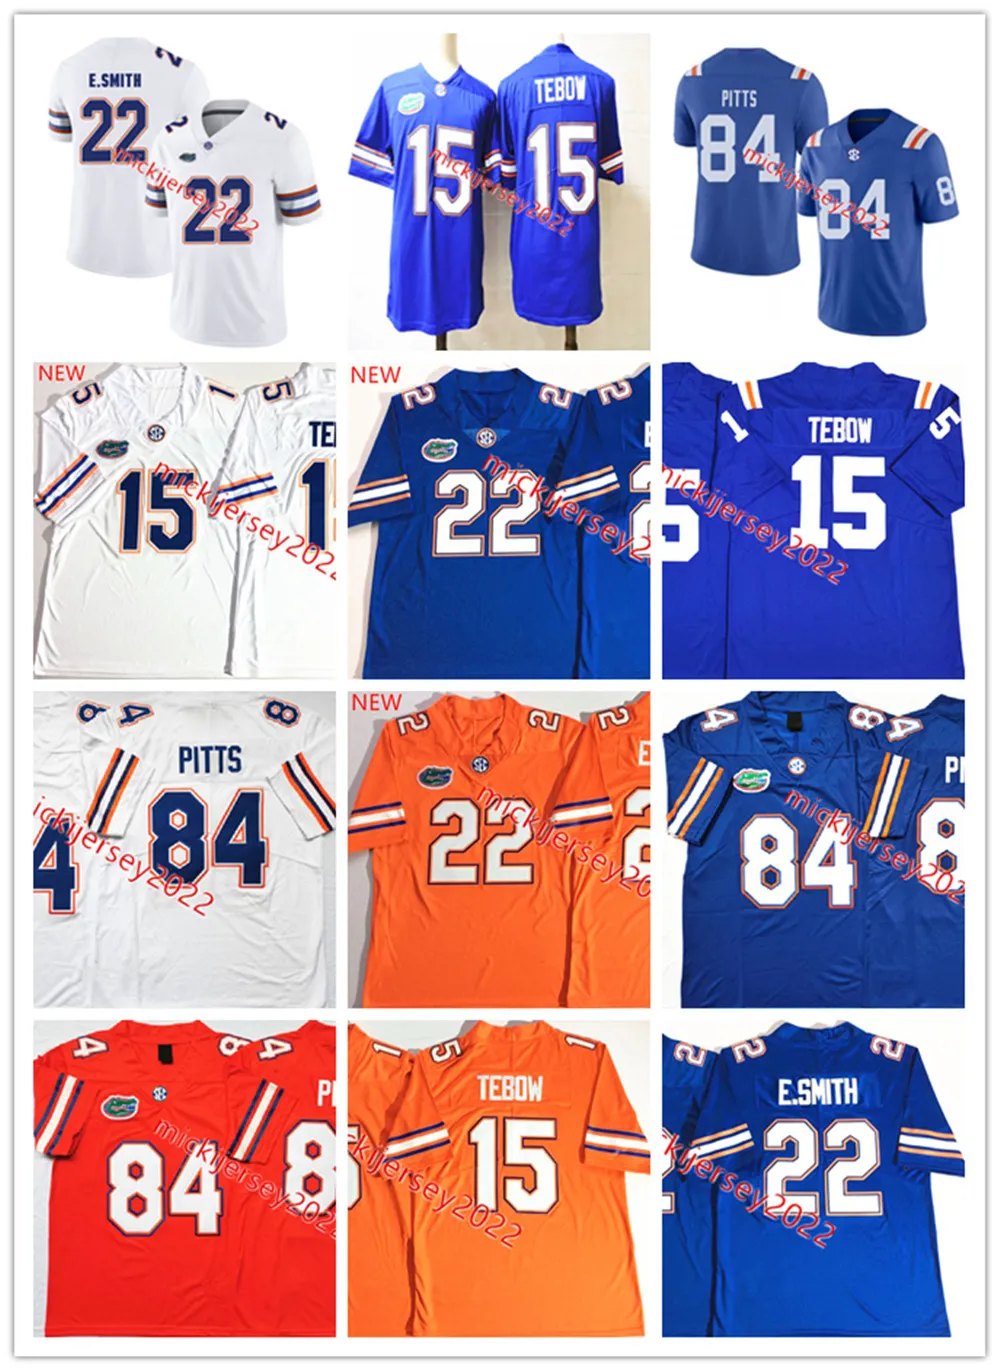 Kyle Pitts Florida Gators Football Jersey Mens Stitched # 22 Emmitt Smith # 15 Tim Tebow Florida Maglie